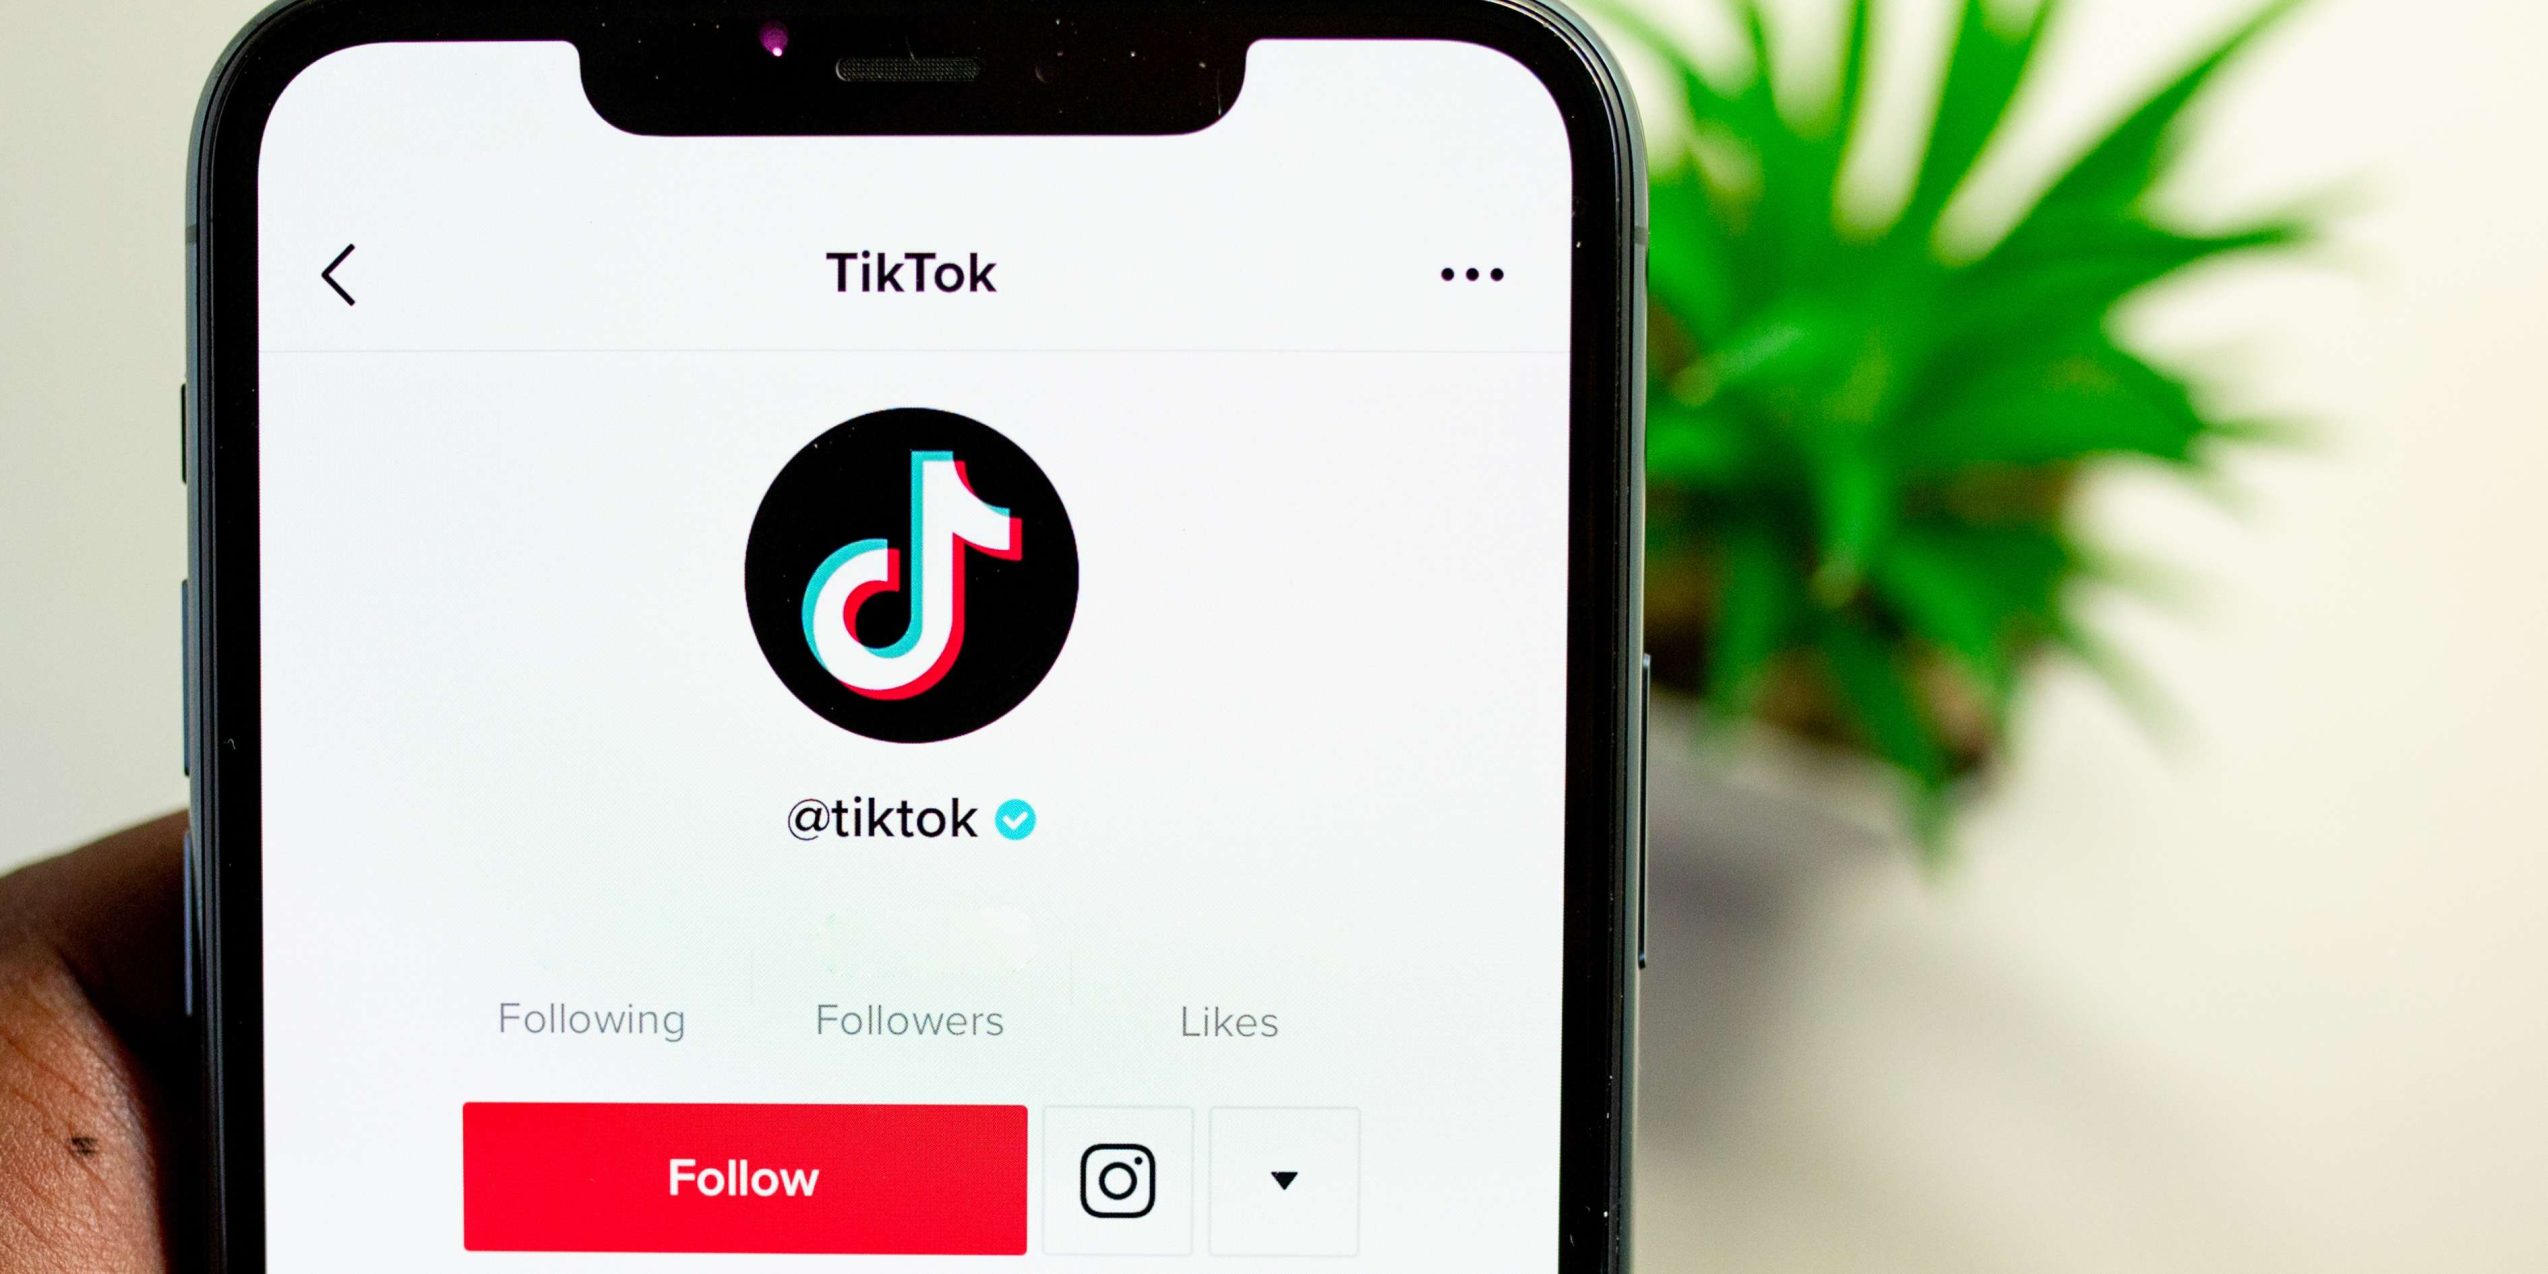 Running ads can be expensive to run on tiktok for small businesses